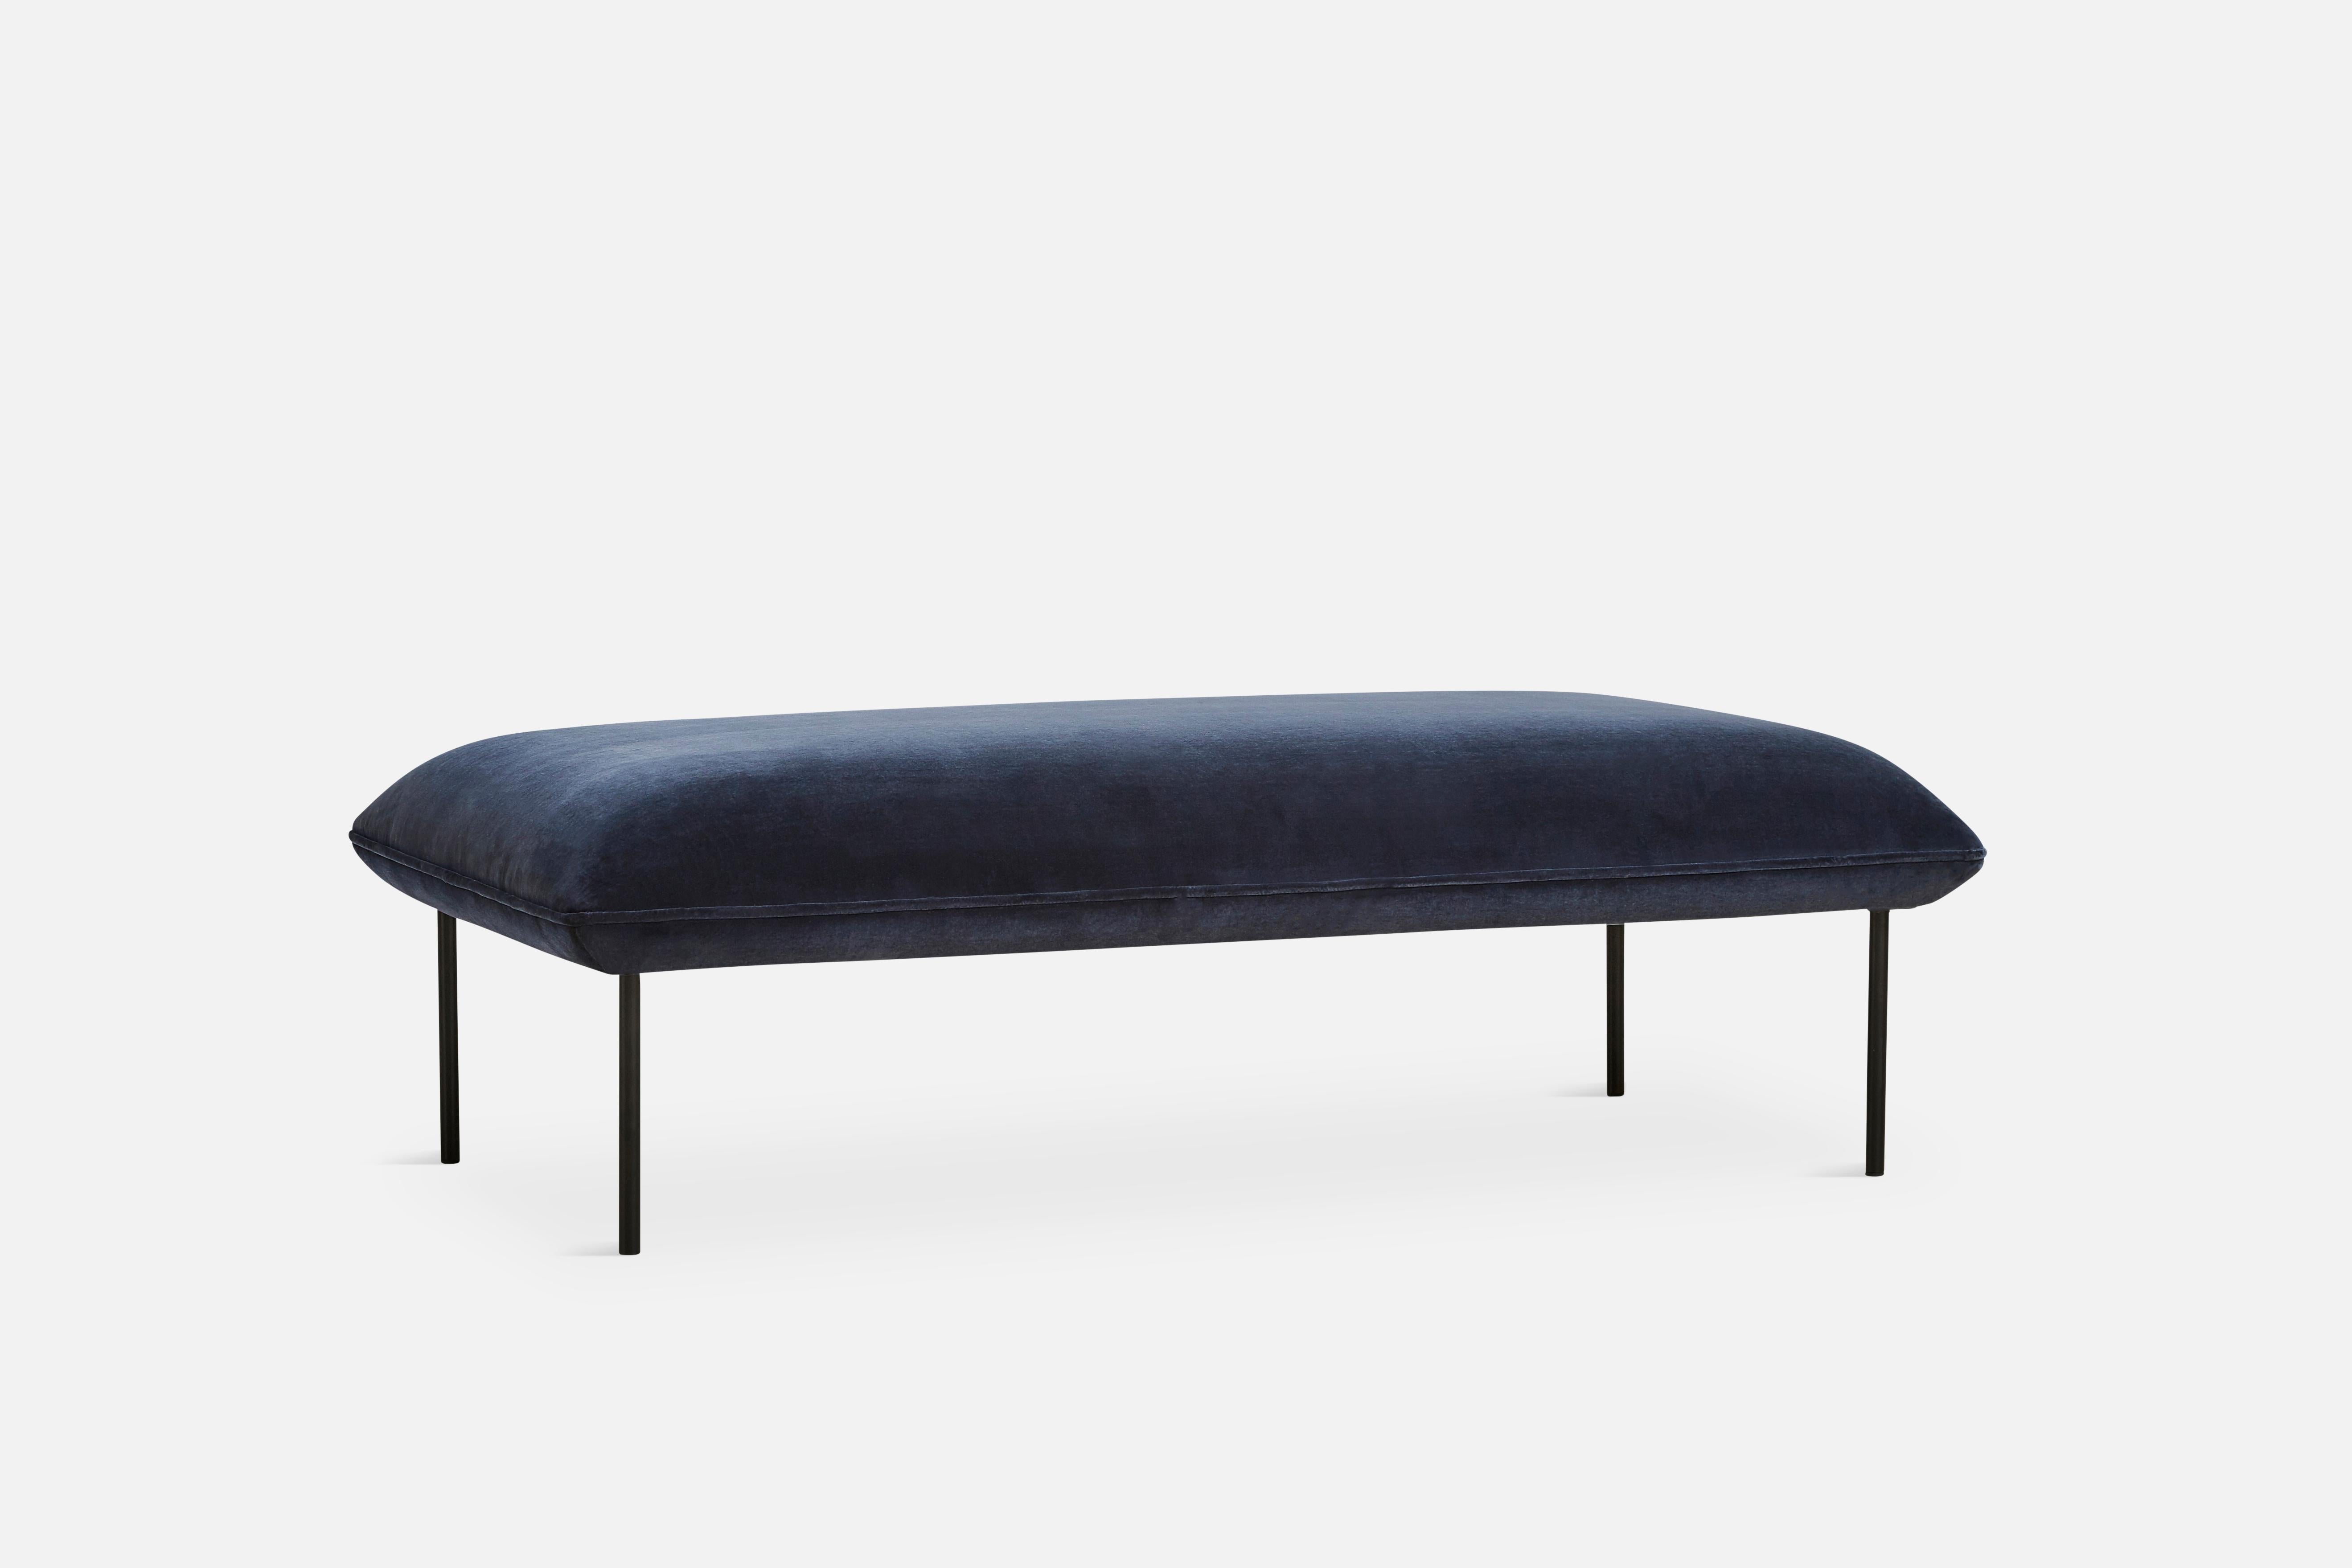 Nakki long ottoman by Mika Tolvanen
Materials: Foam, plywood, elastic belts, memory foam, fabric (Harald 3, 0182)
Dimensions: D 80 x W 150 x H 46 cm
Also available in different colours and materials.

The founders, Mia and Torben Koed, decided